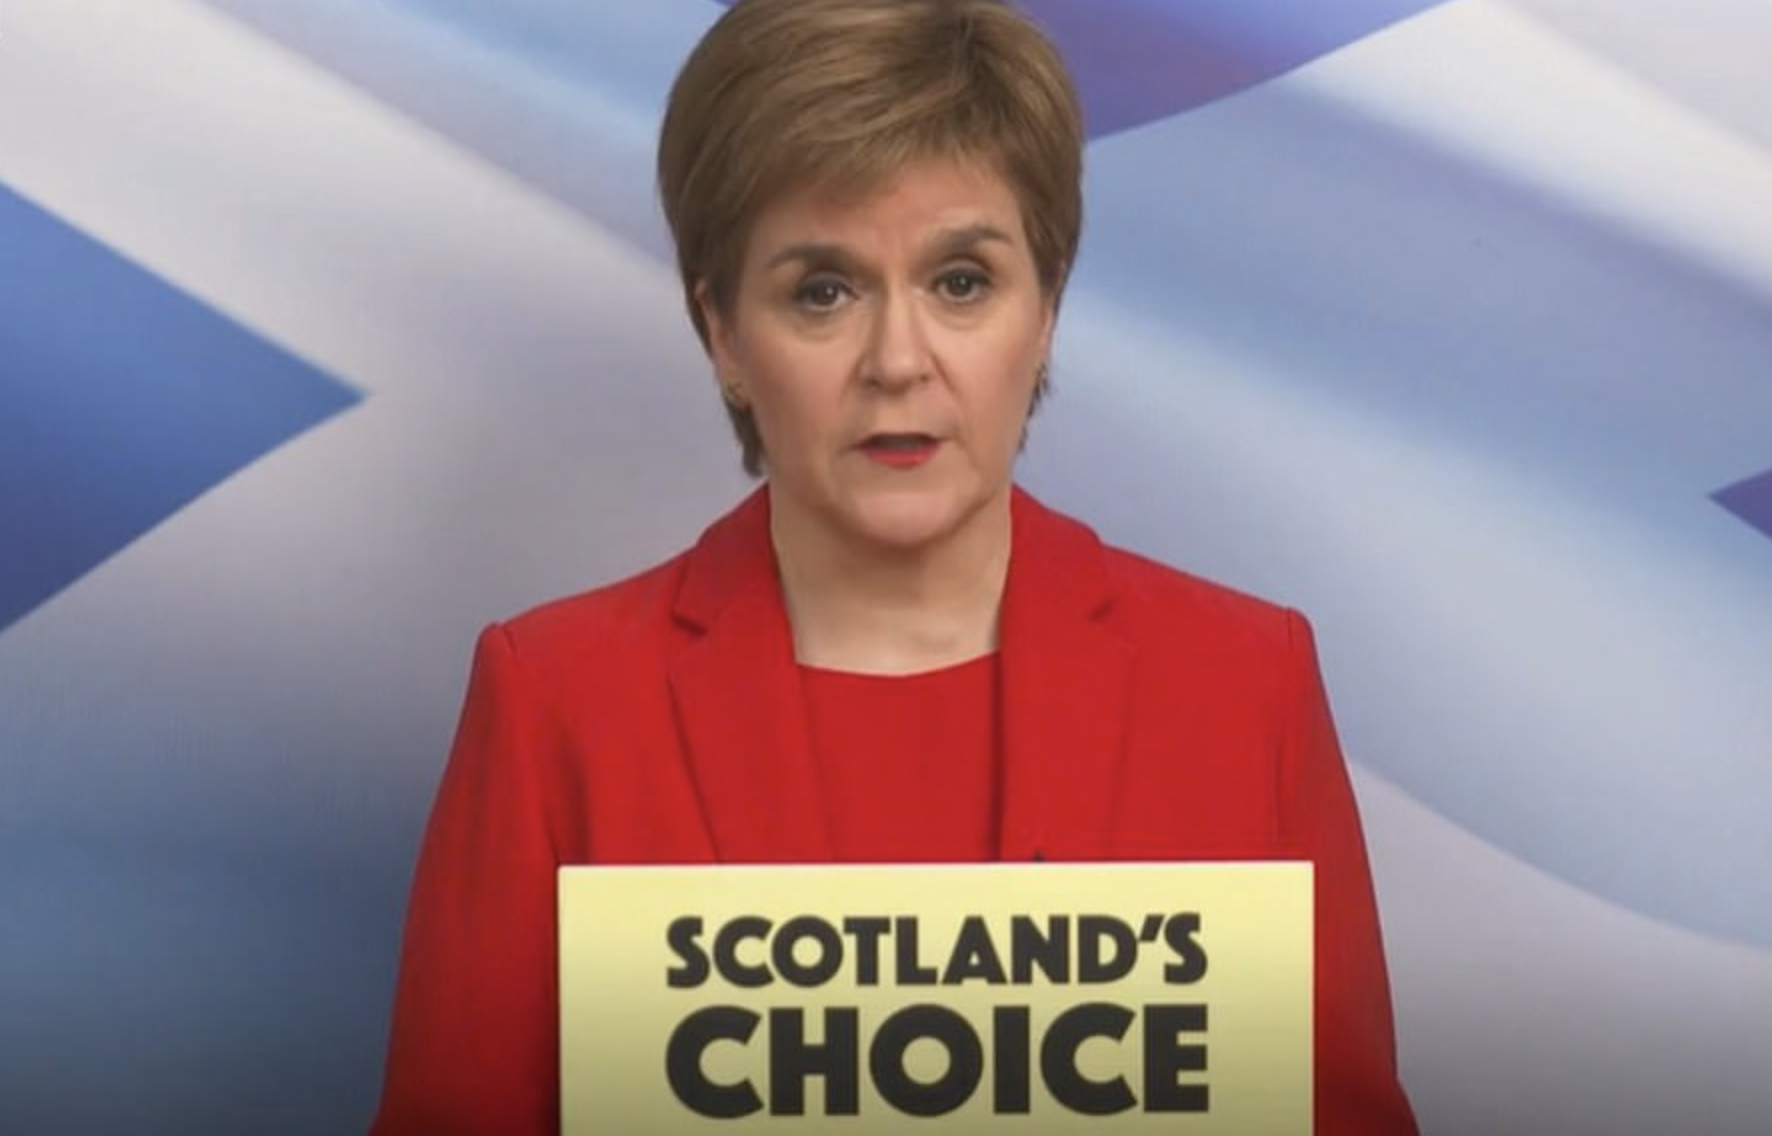 Nicola Sturgeon vows to banish dental charges for Scottish patients in election manifesto